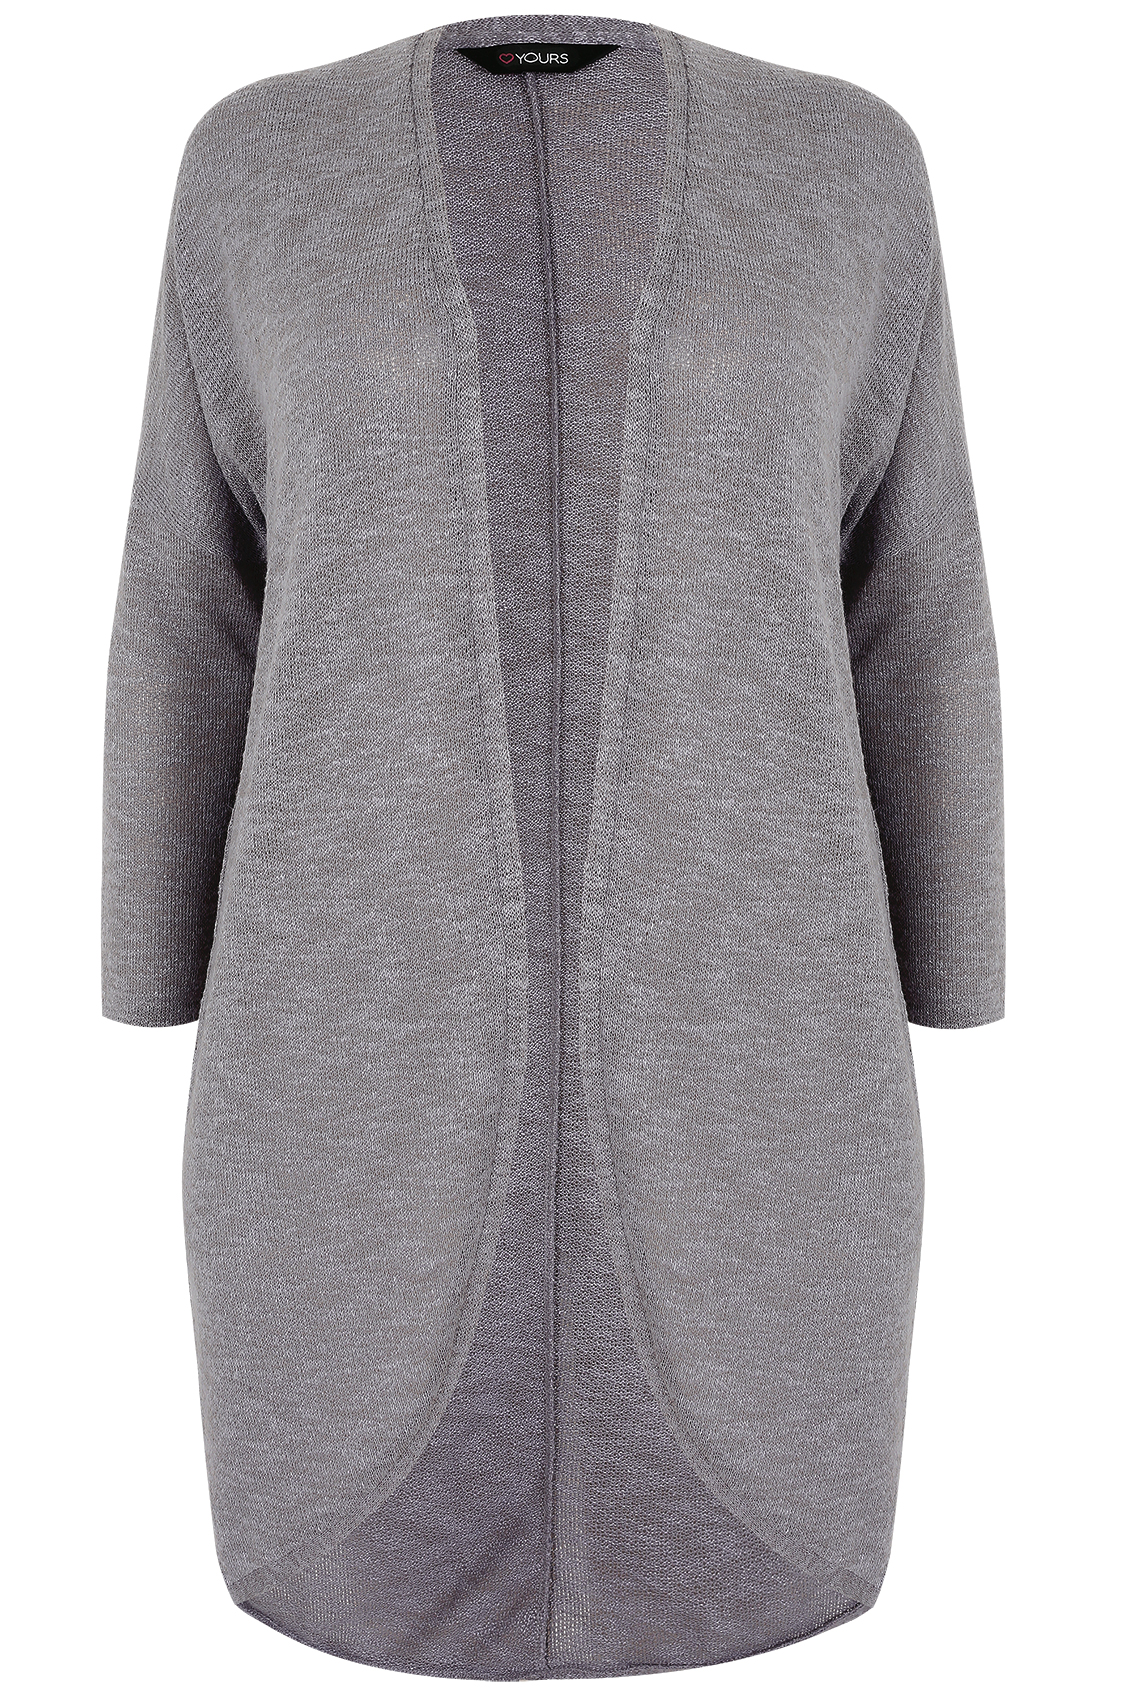 Grey Knitted Longline Cocoon Cardigan With Drop Shoulder Sleeves, Plus ...